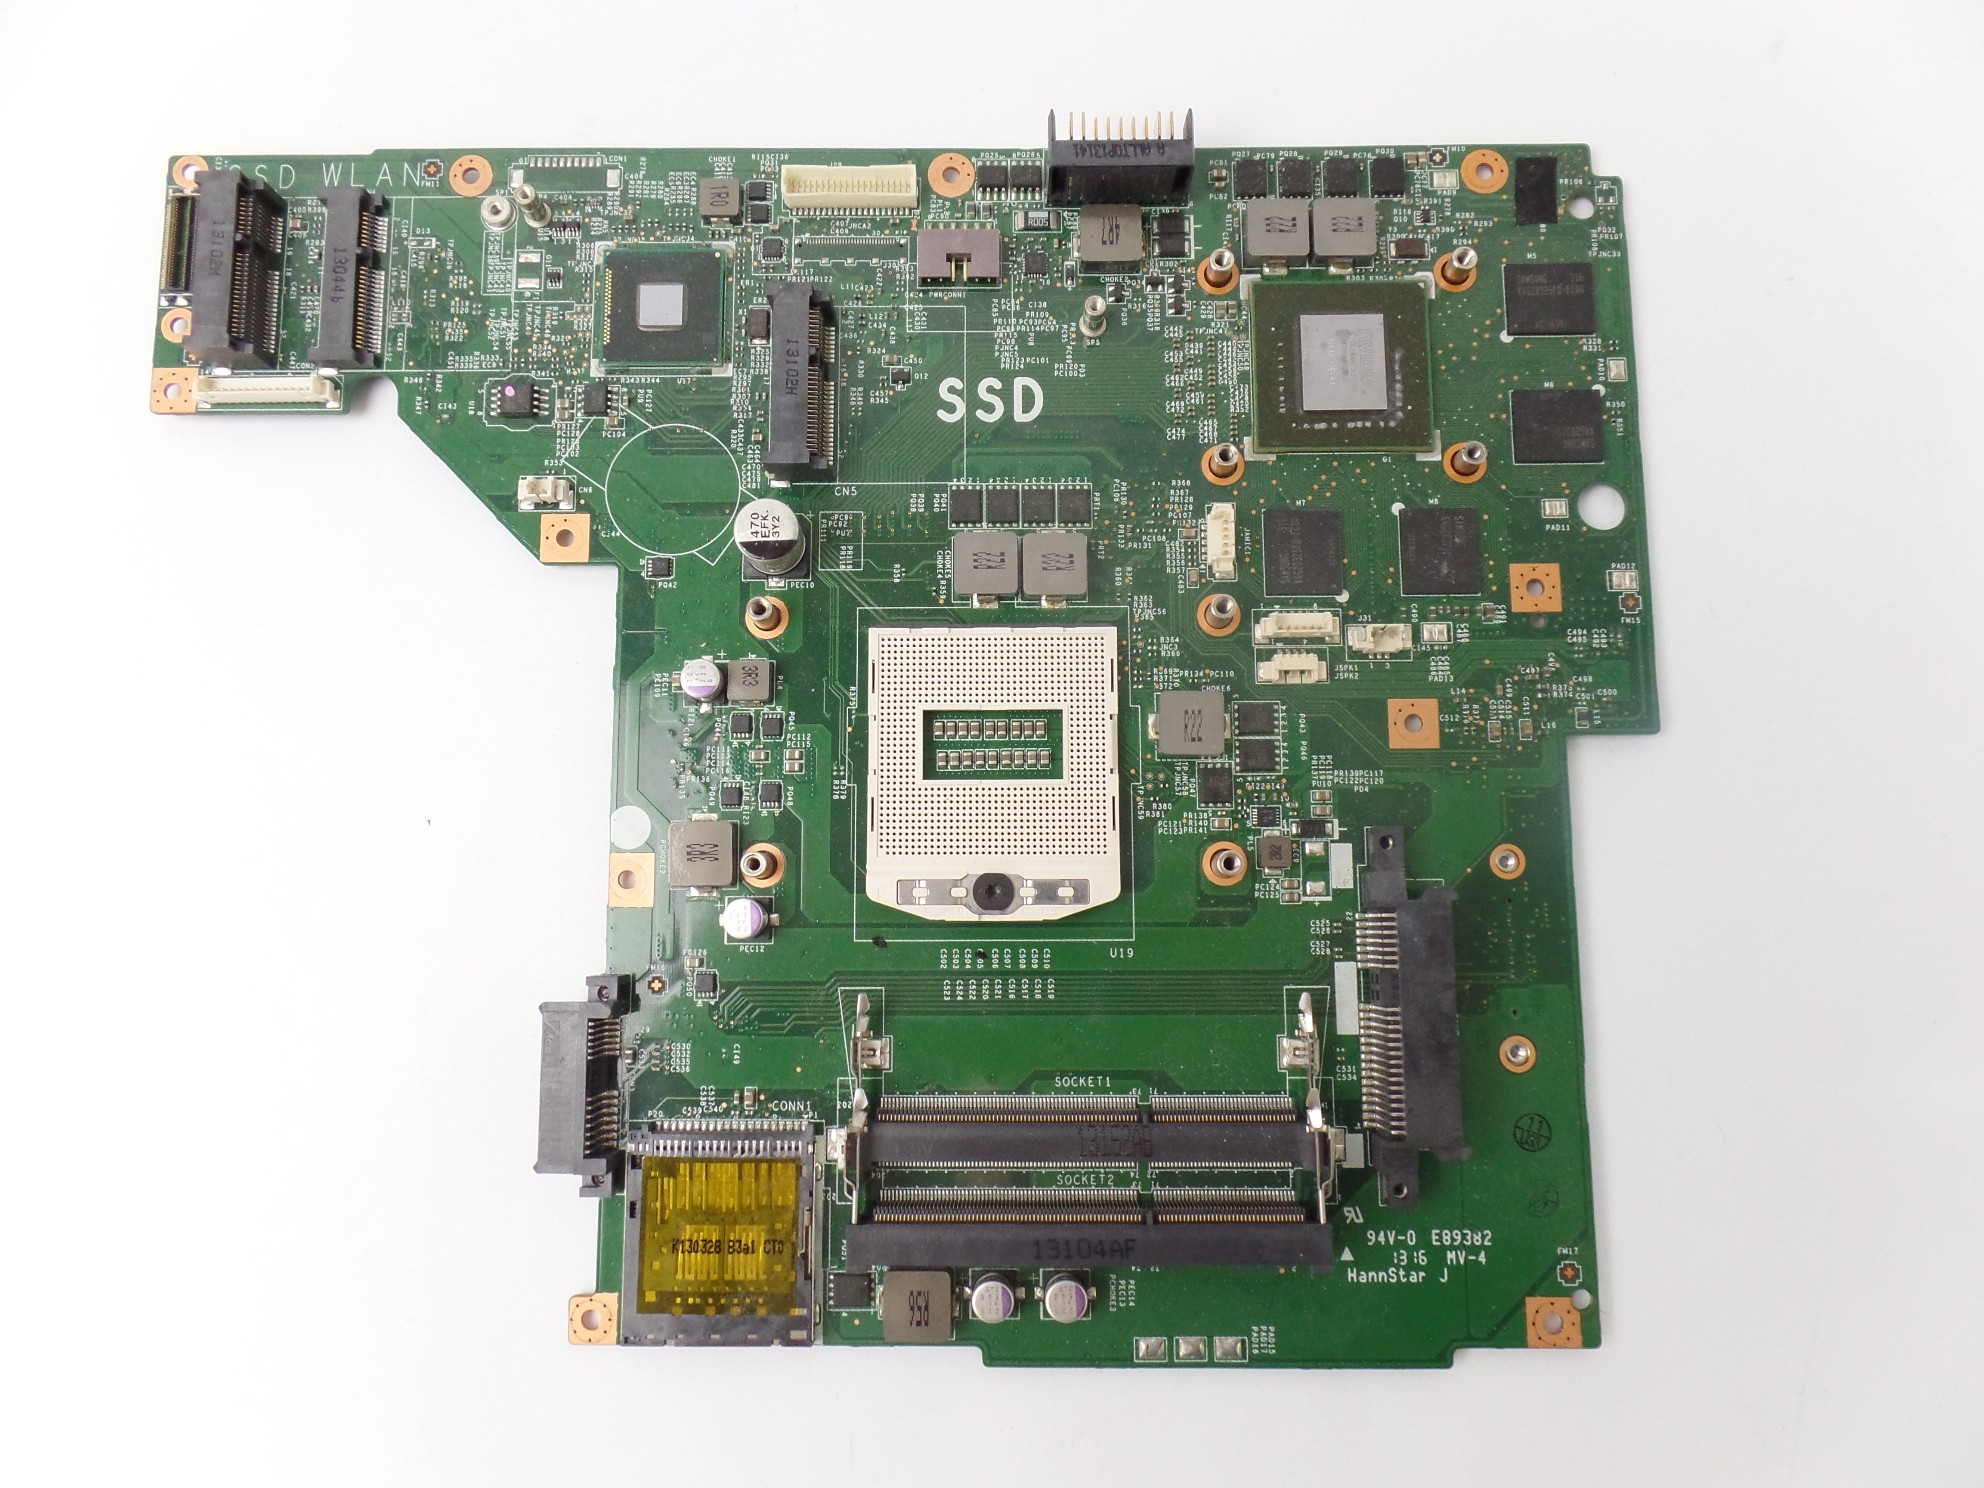 Bad OEM Motherboard for MSI GE60 MS-16GC1 Ver. 1.0 No CPU - No power